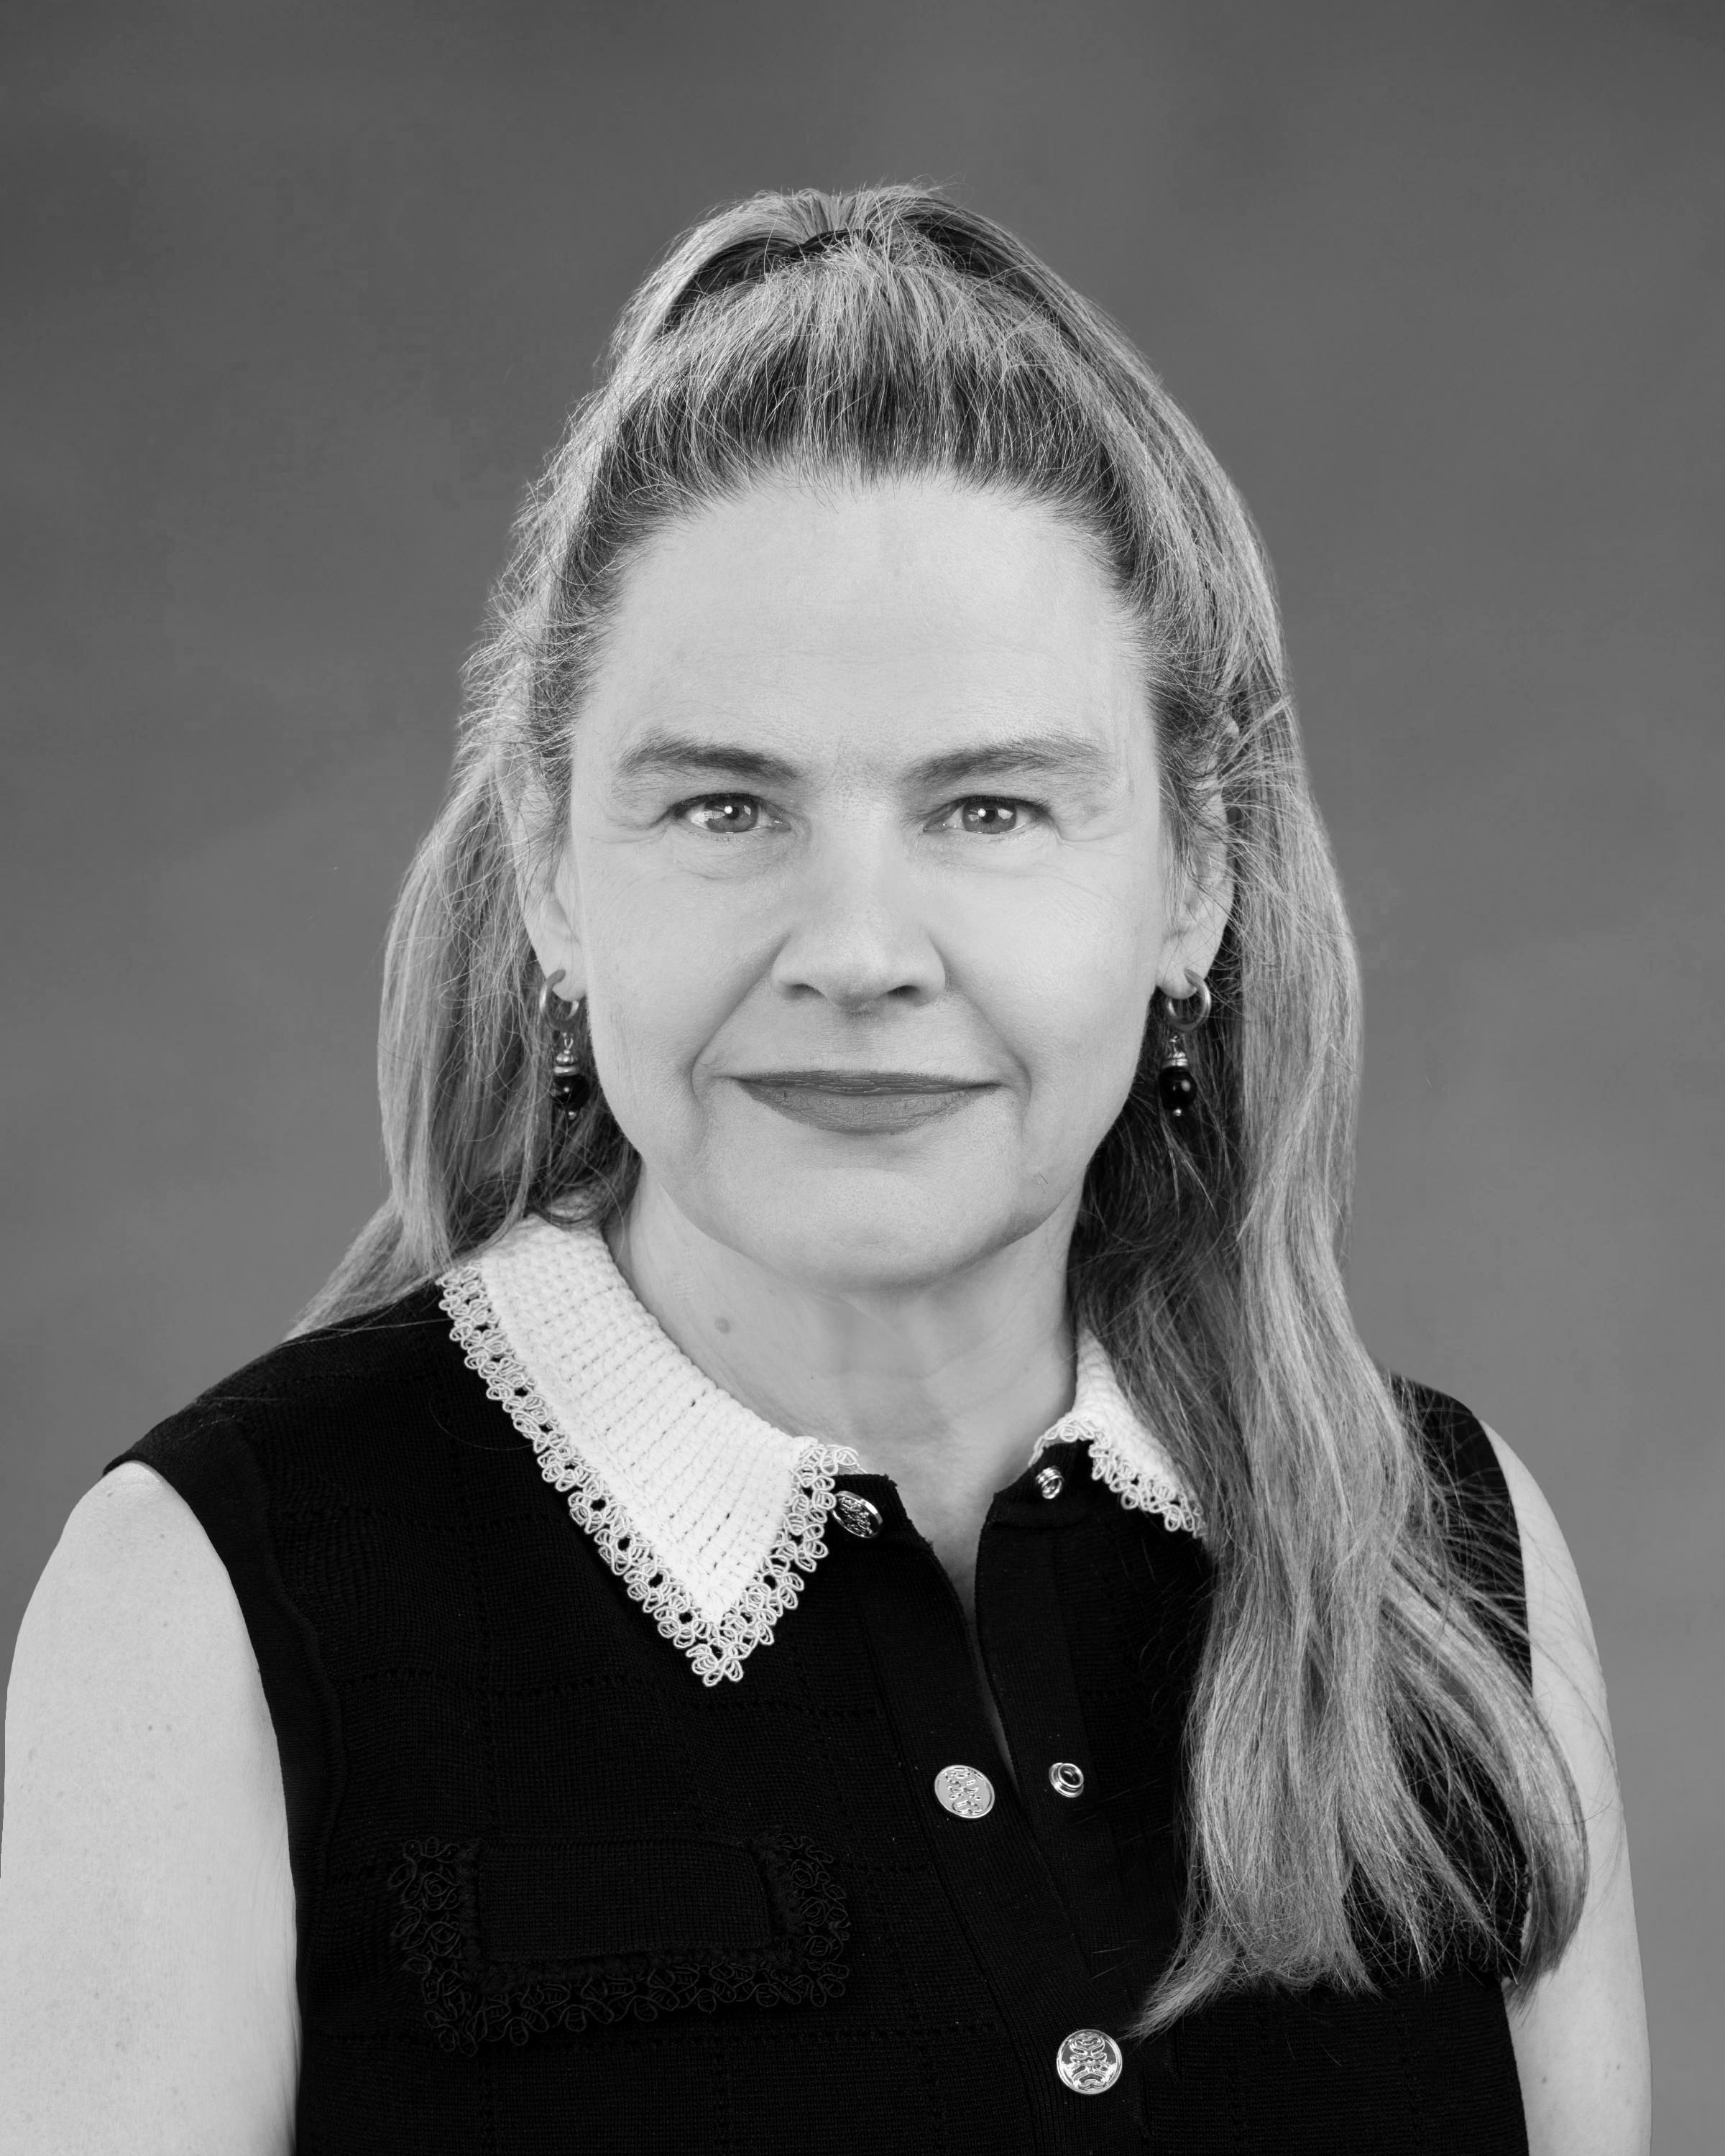 Official Portrait of Vice Chair Nourse, United States Commission on Civil Rights